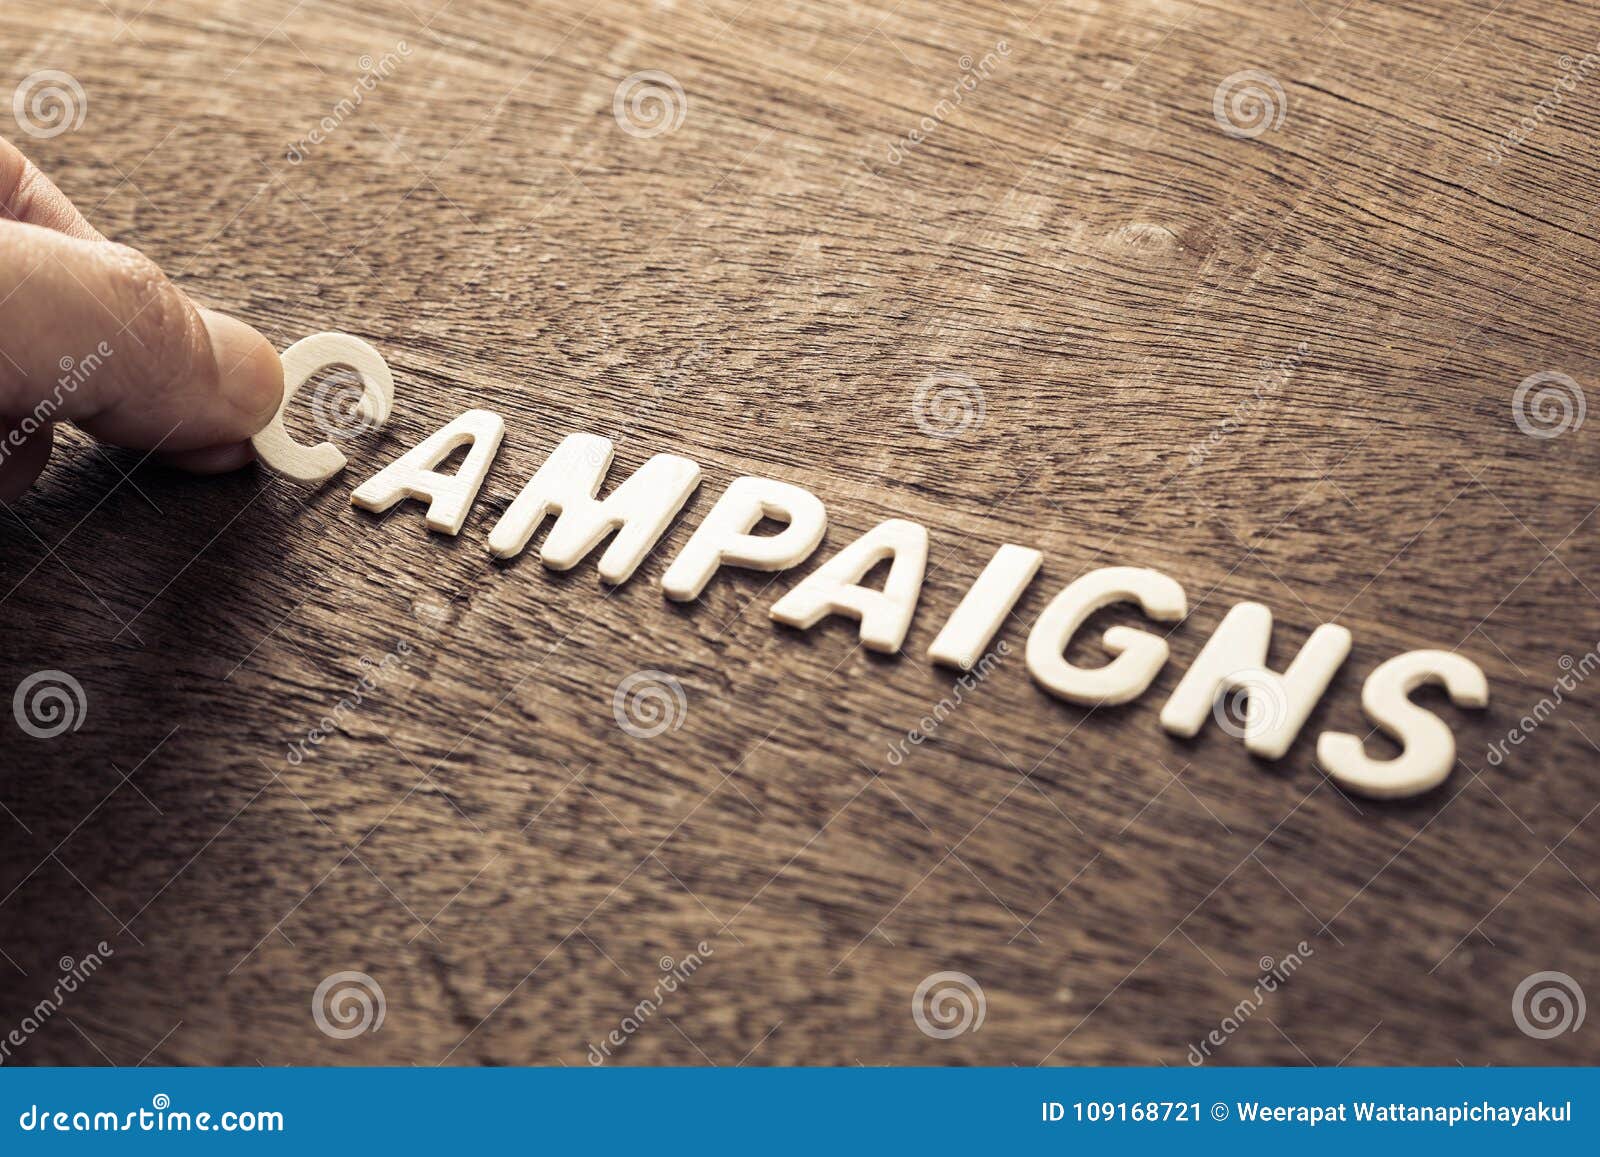 campaigns word for marketing